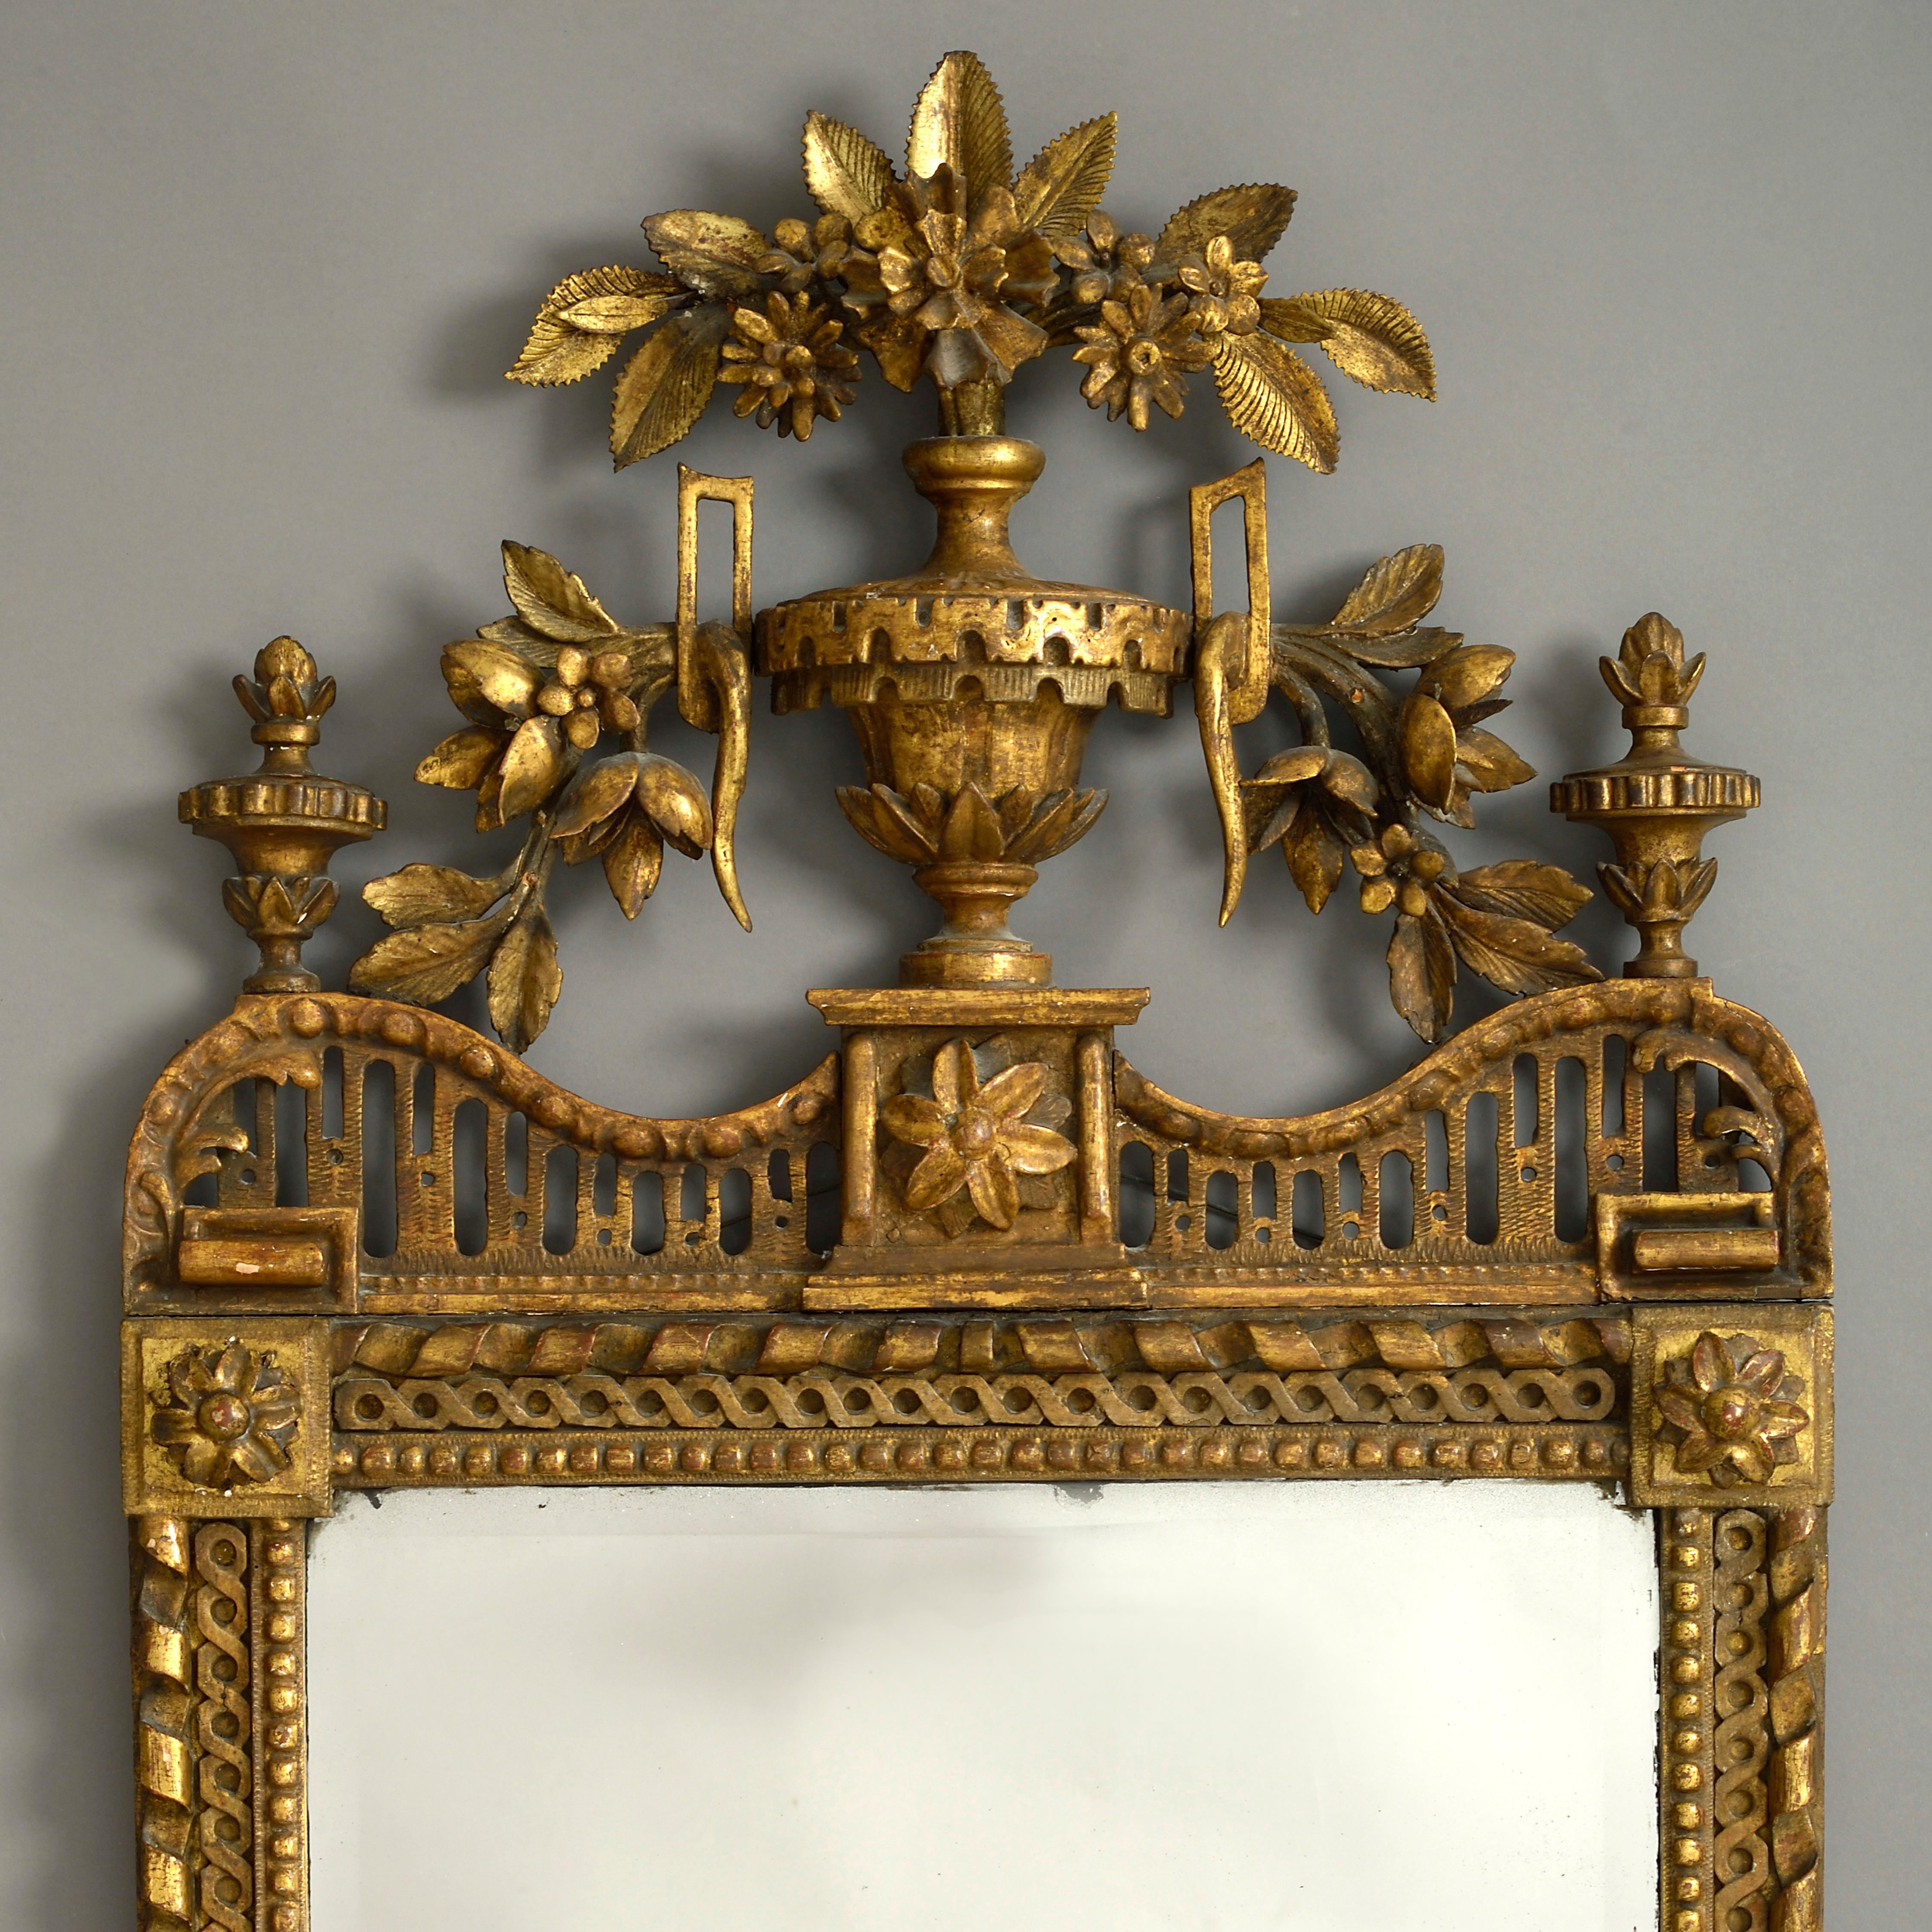 A fine late 18th century pier mirror, the intricately carved giltwood frame surmounted by a floral cresting, a classical urn and foliate garlands, the corners having carved paterae, all housing a beveled mercury plate.